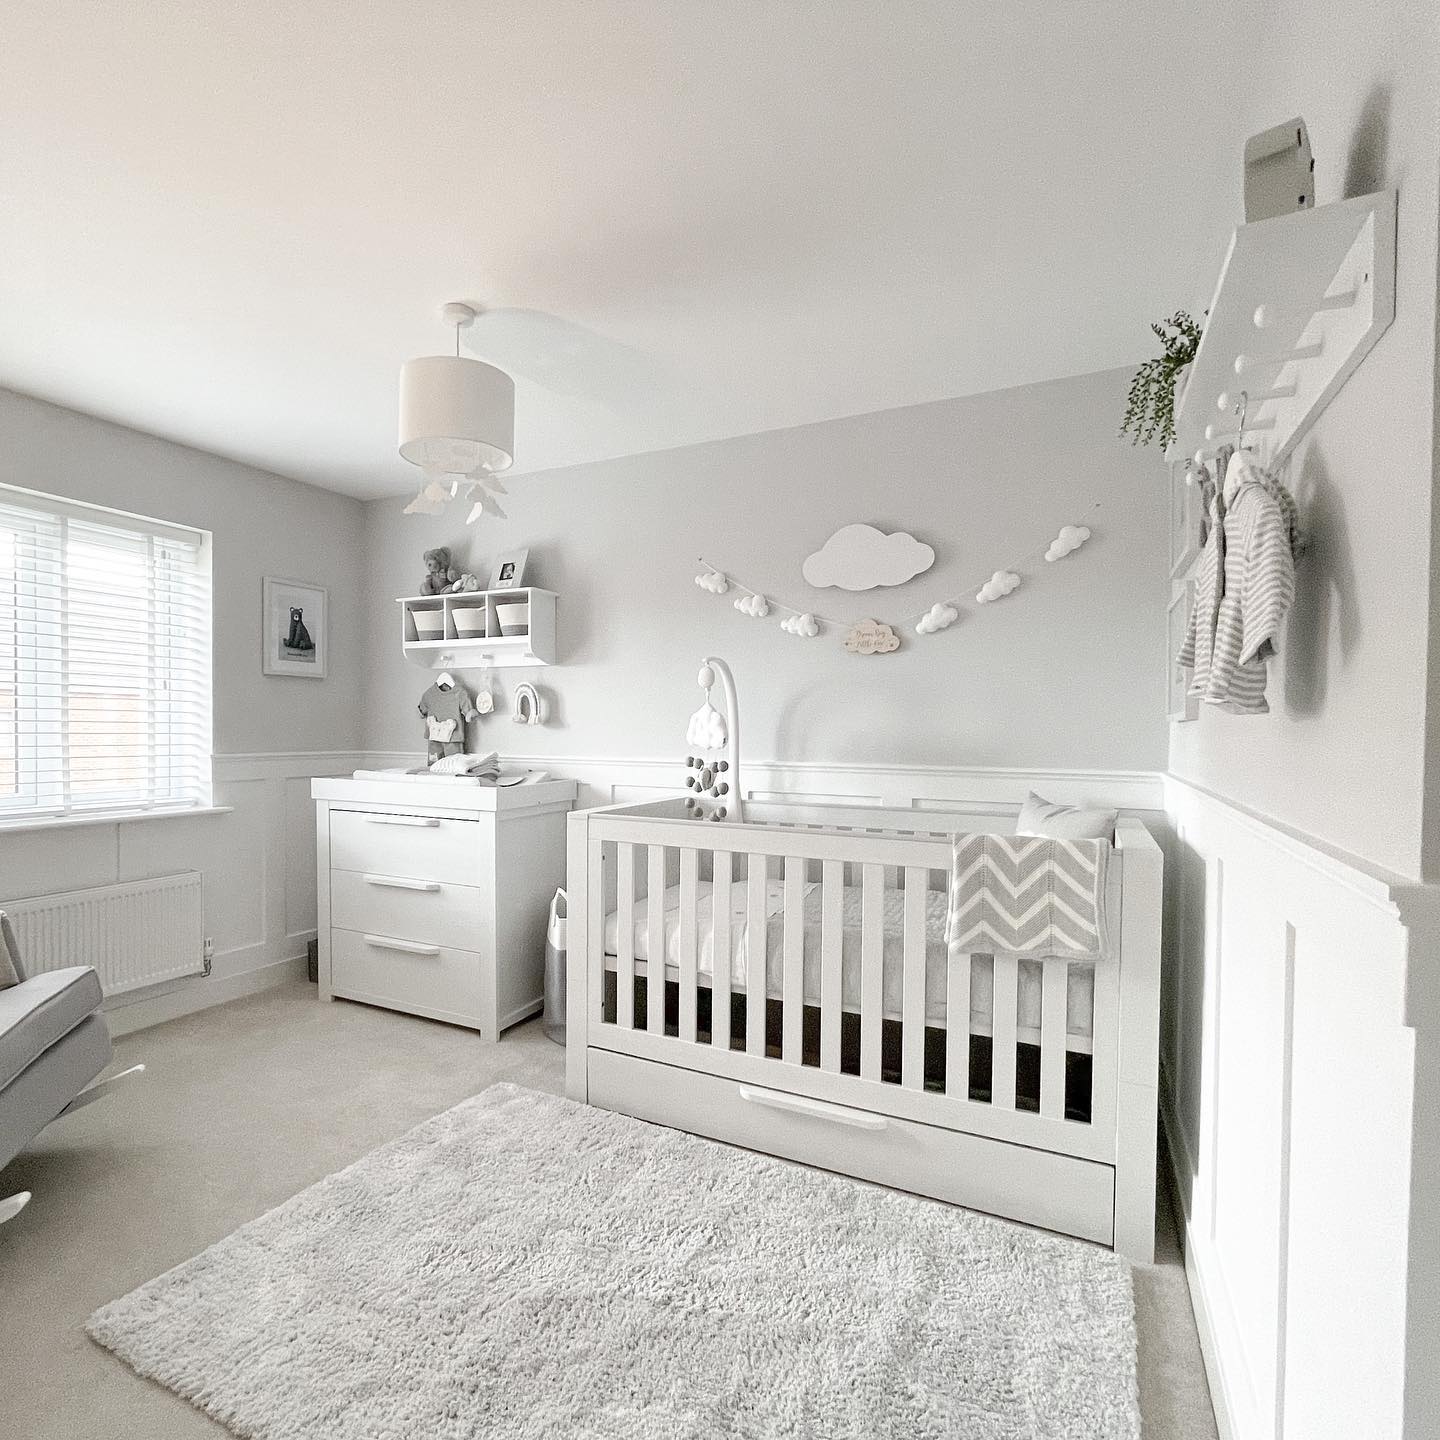 Gray nursery with cloud-themed wall decor behind the crib. Photo by Instagram user @jessicalouise.home. 